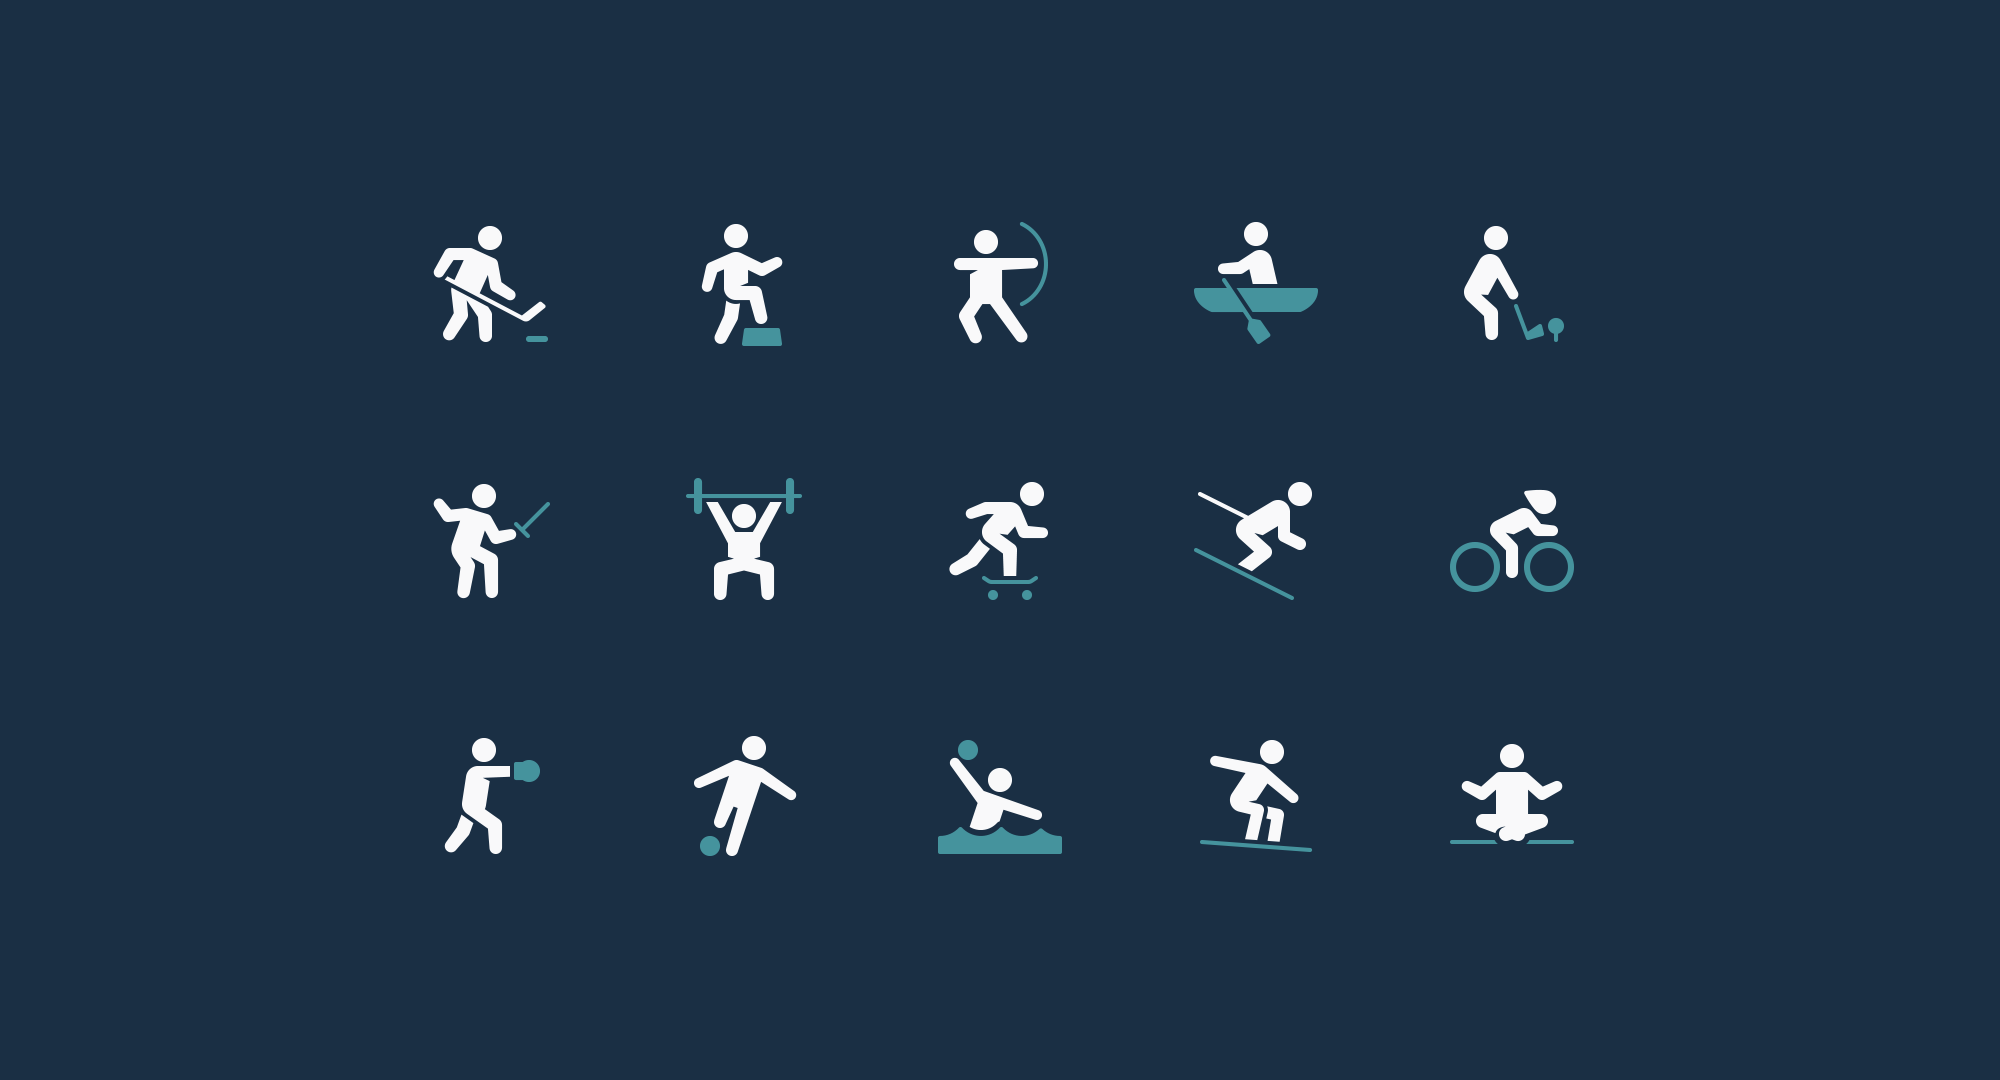 How To Create Human Figure Icons In This Tutorial I Ll Walk You Through By Sebastiano Guerriero Nucleo